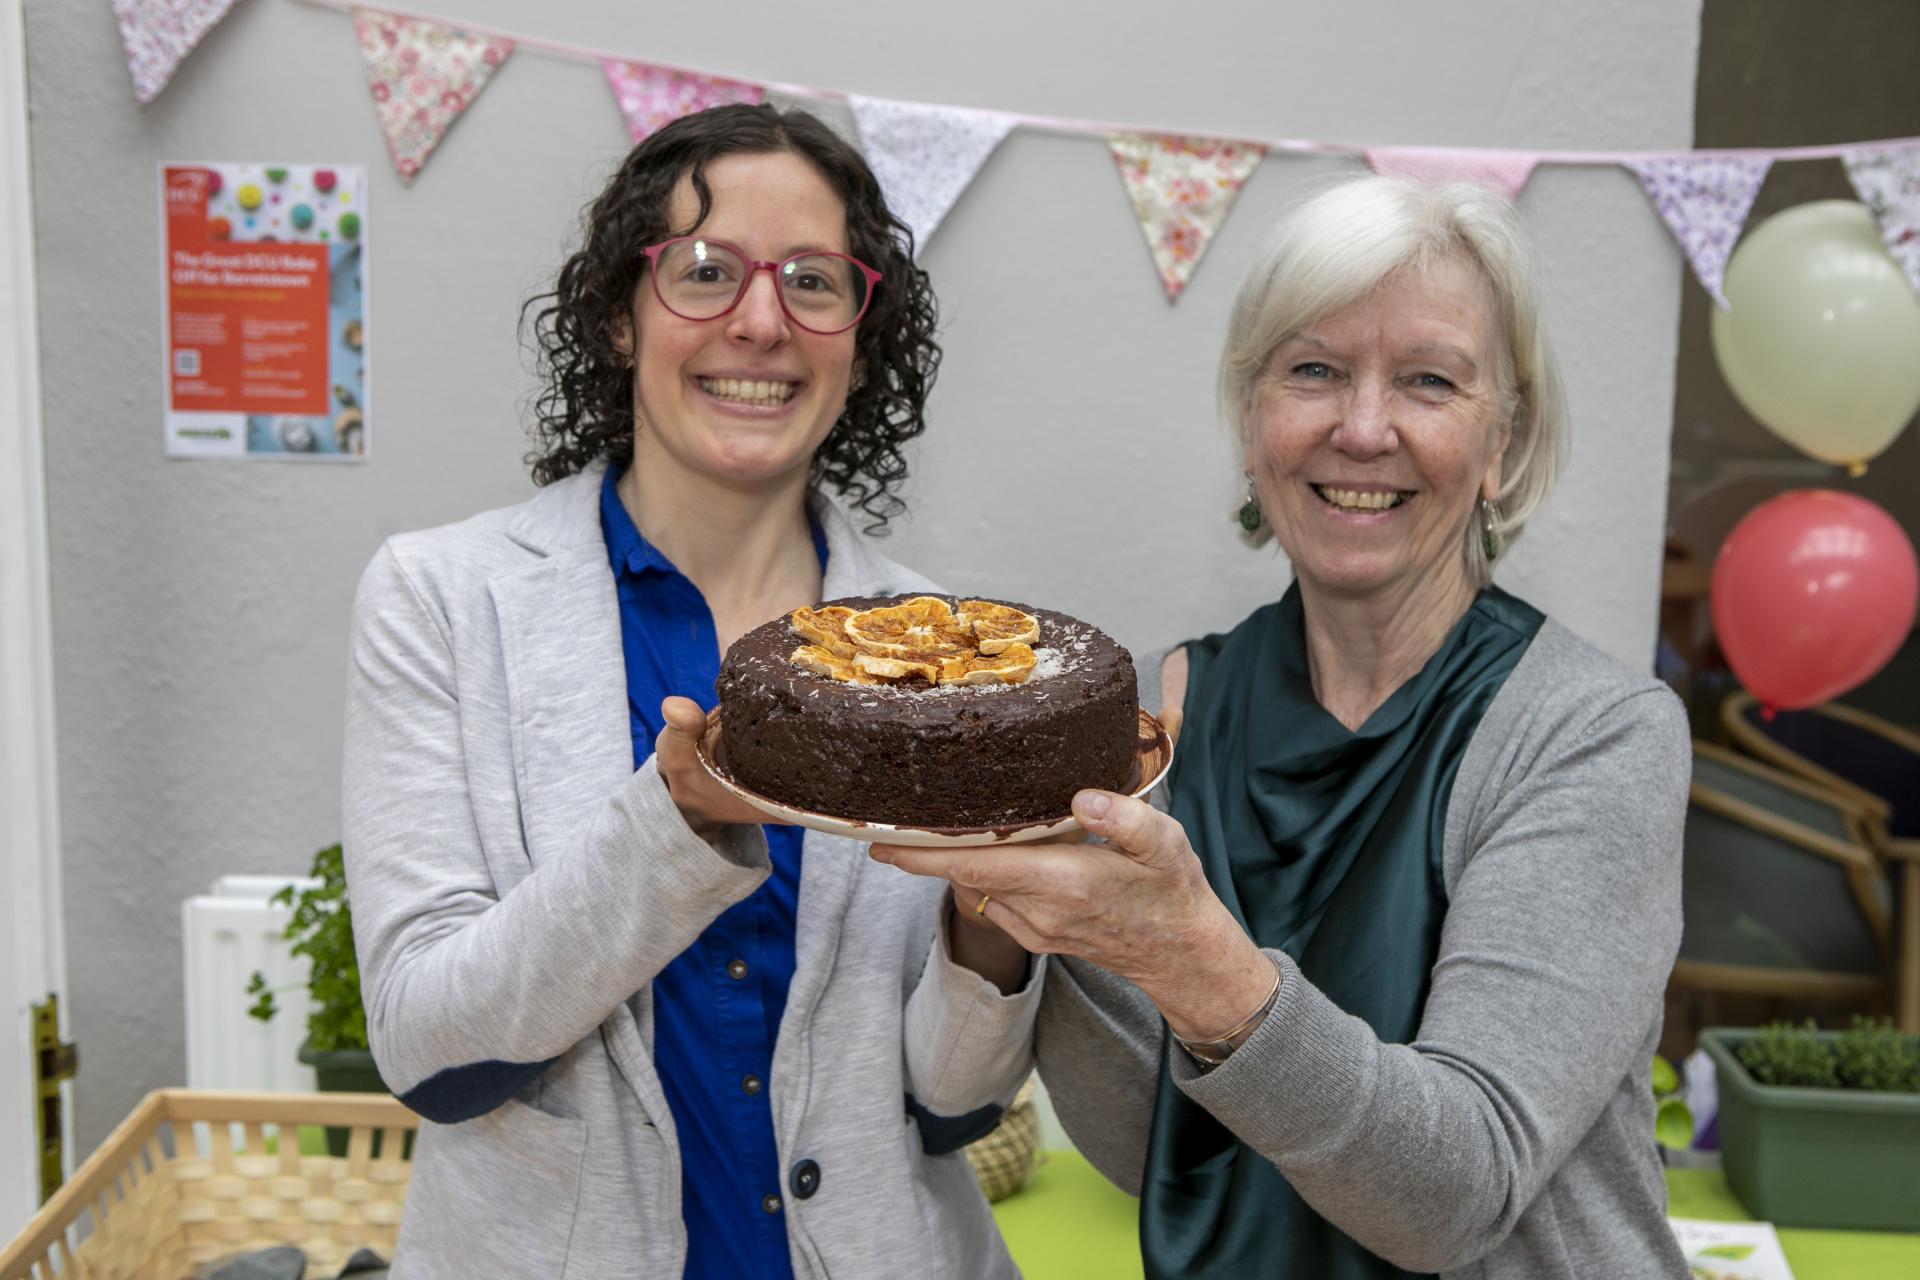 Shows Jennifer with her Citric Vegan Cake during the DCU Bake Off for Barretstown